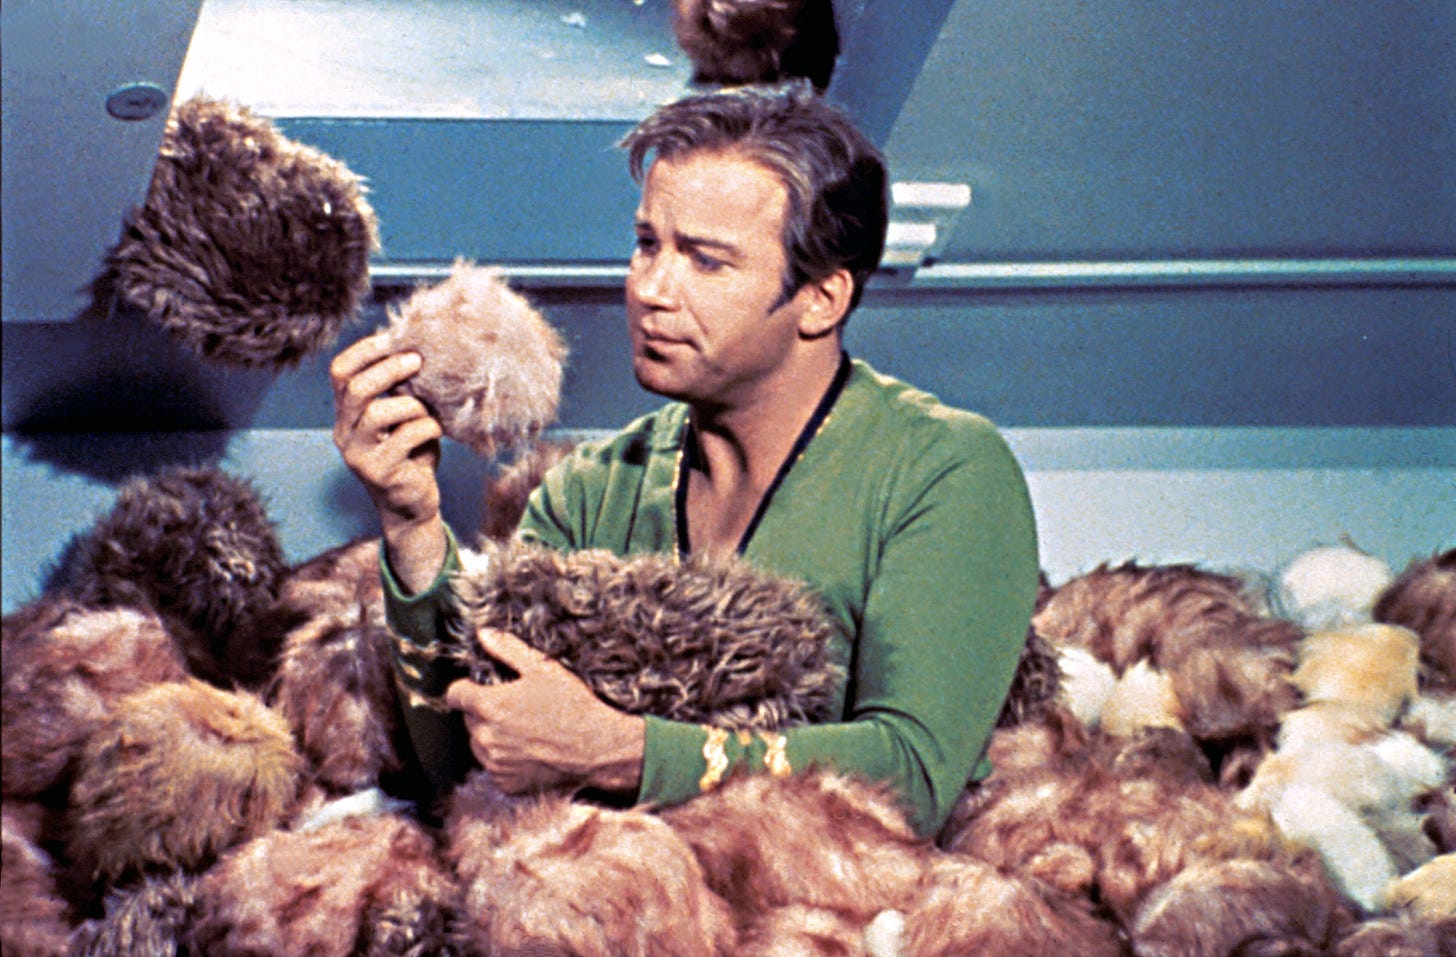 Star Trek: Inside “The Trouble with Tribbles,” 50 Years Later | Vanity Fair